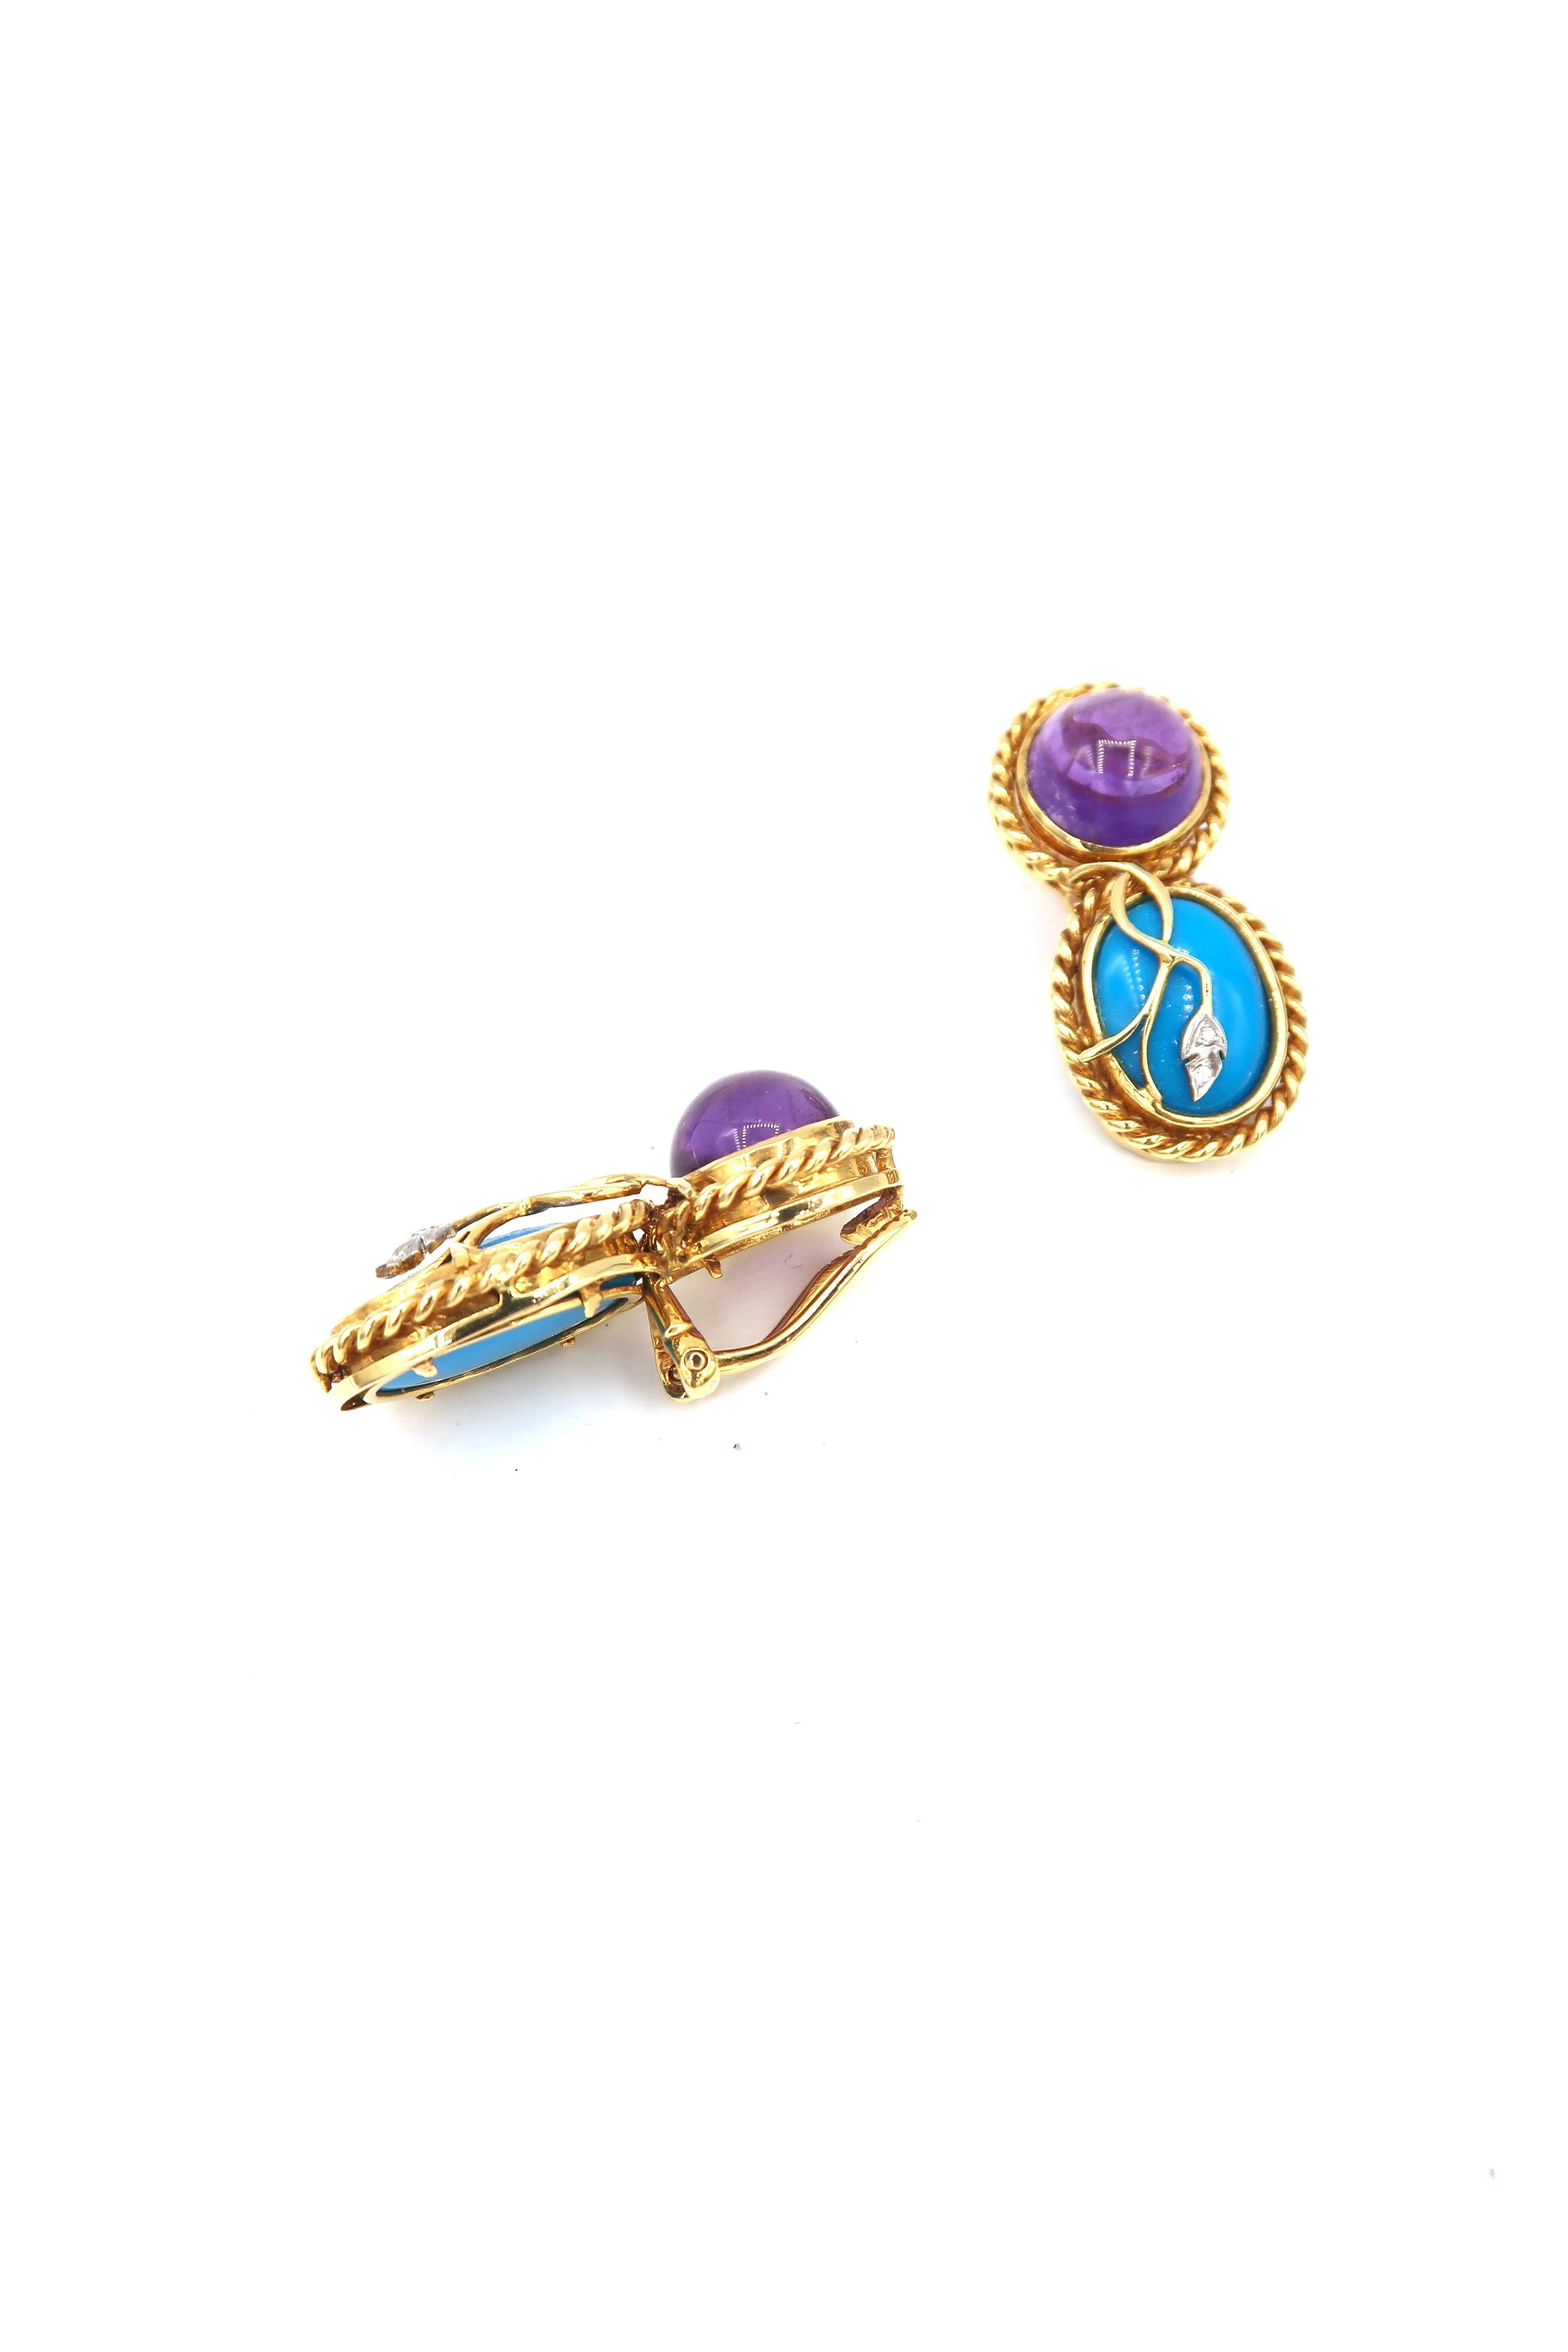 Rope Detail Clip-on Earrings in 18K Gold with Cabochon Amethyst and Turquoise, and Diamond

Gold: 18K Gold 27.05g.
Turquoise: 17.925cts.
Amethyst: 16.08cts.
Diamond: 0.04cts.